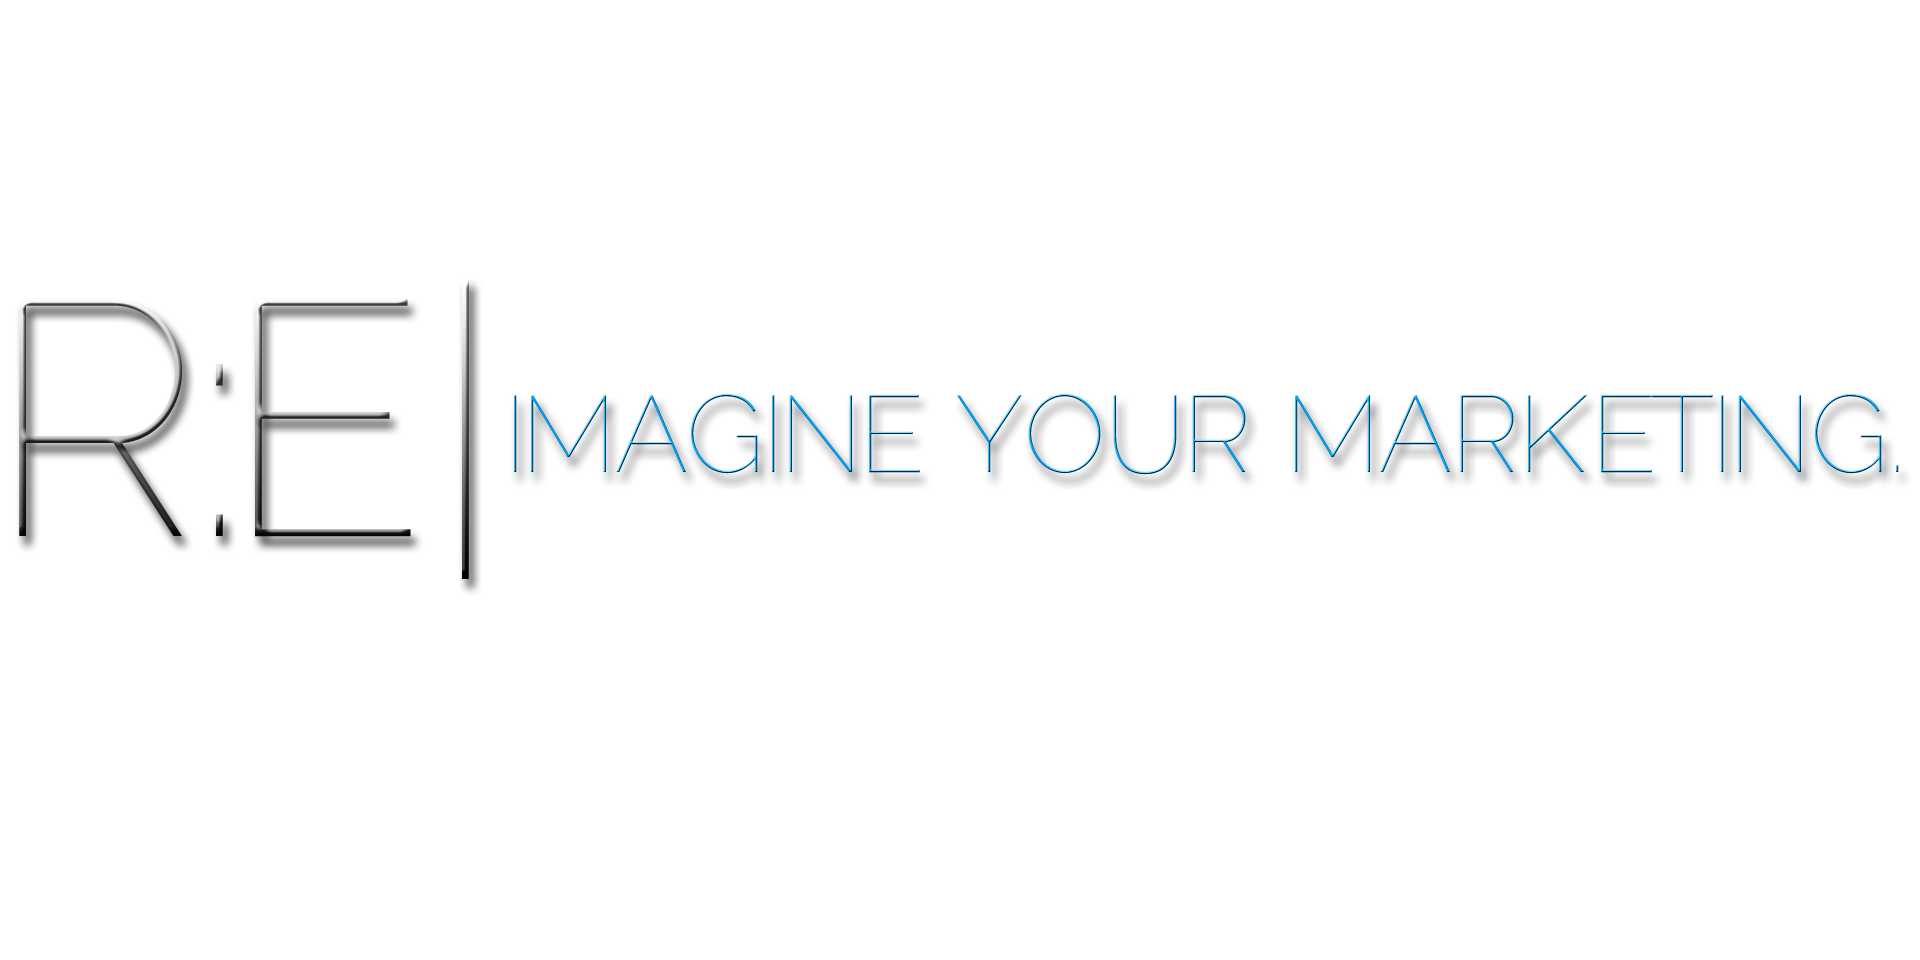 RE | IMAGINE YOUR MARKETING.